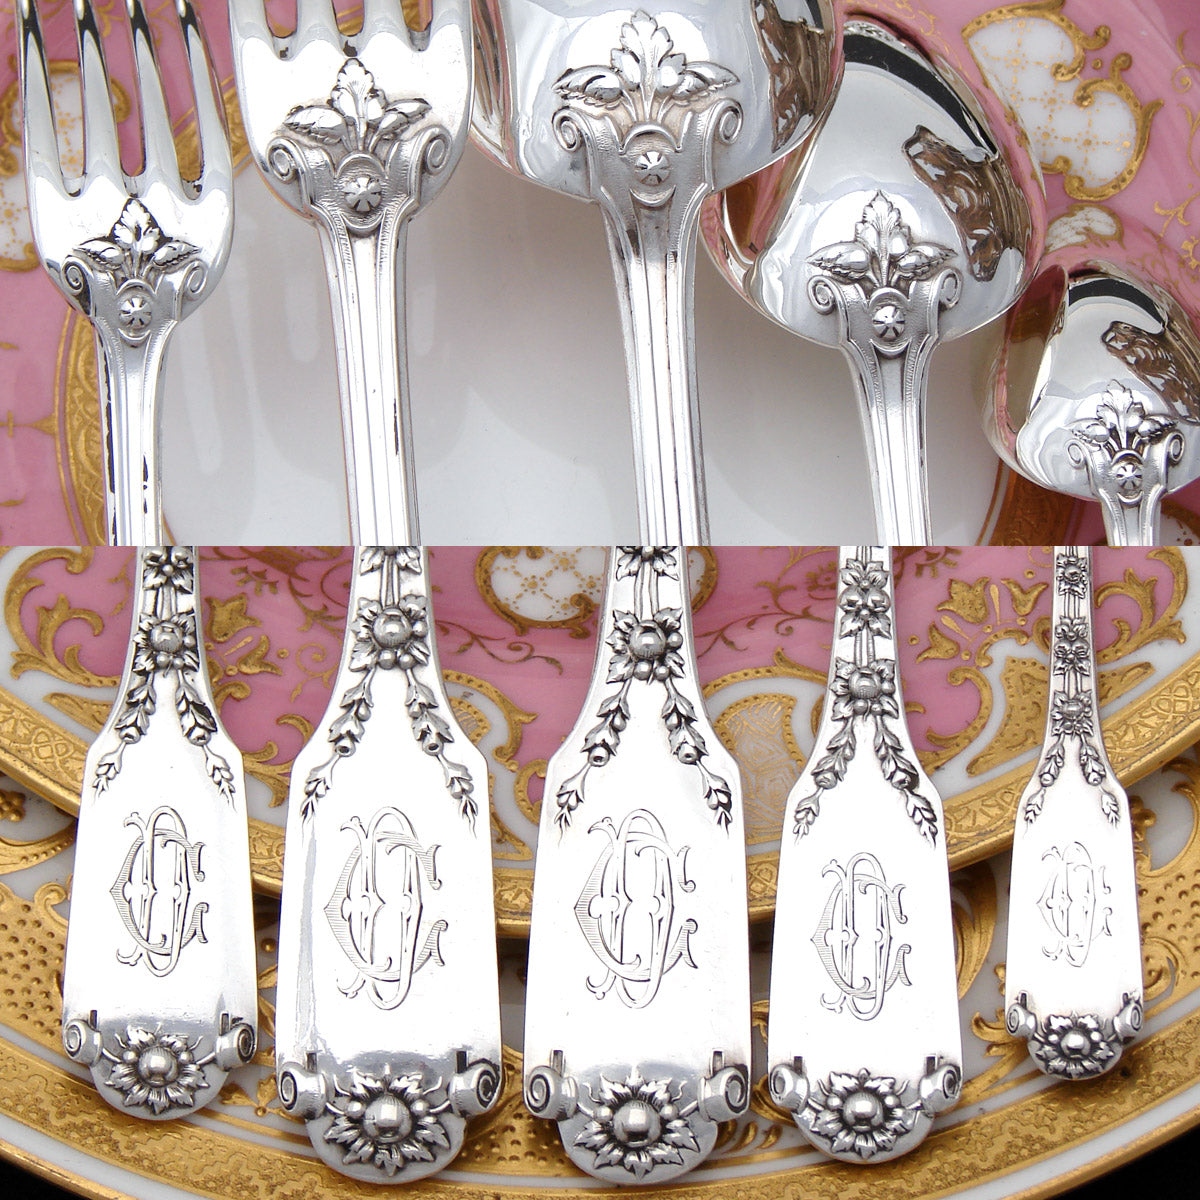 RARE Antique French Sterling Silver 83pc Flatware Set, 5pc for TWELVE, Serving Pieces, Chest